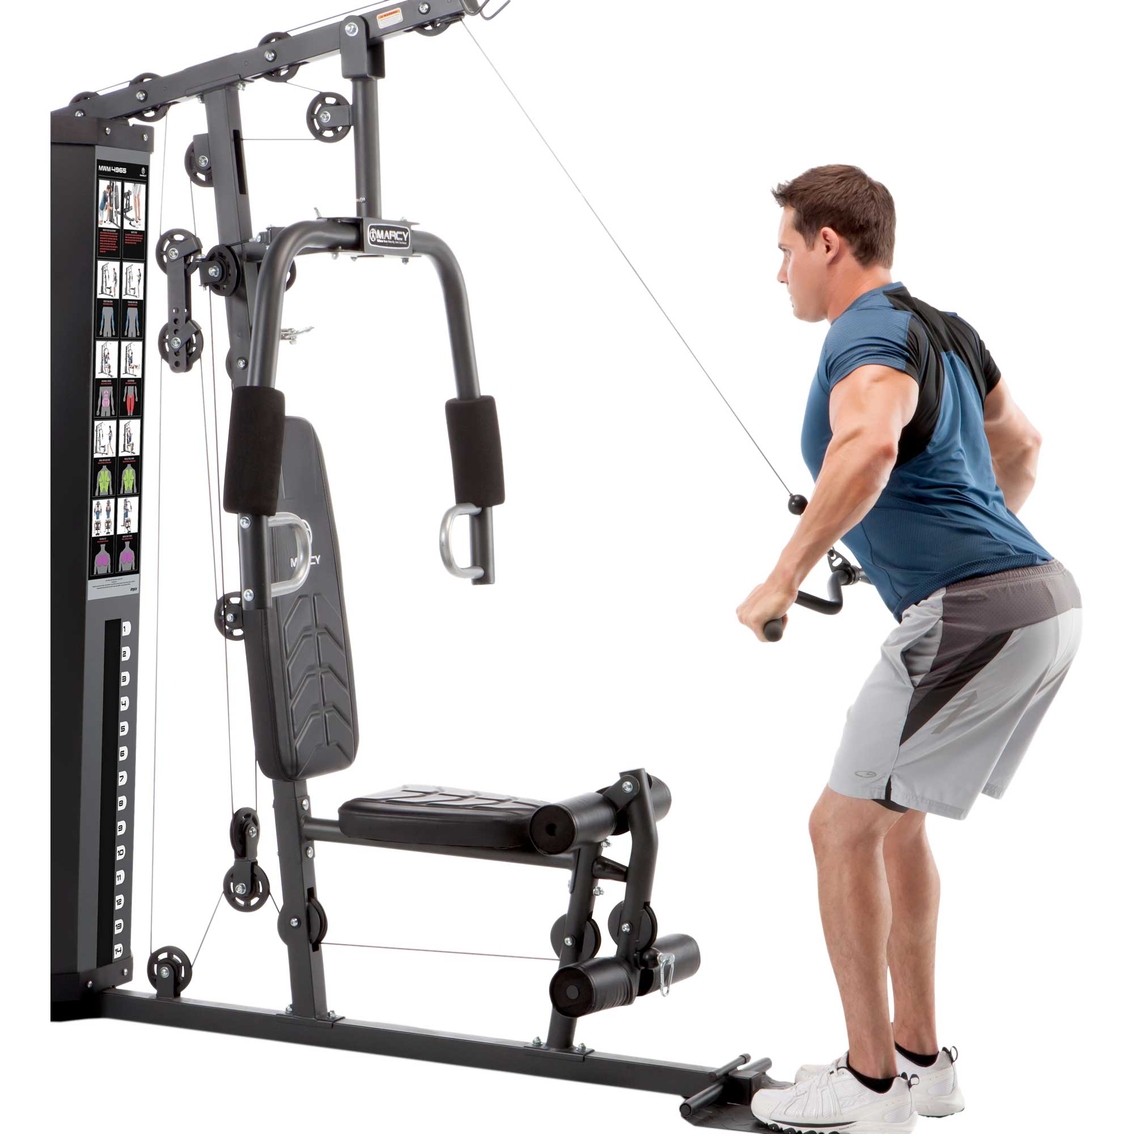 Marcy 150 lb. Stack Home Gym - Image 5 of 10